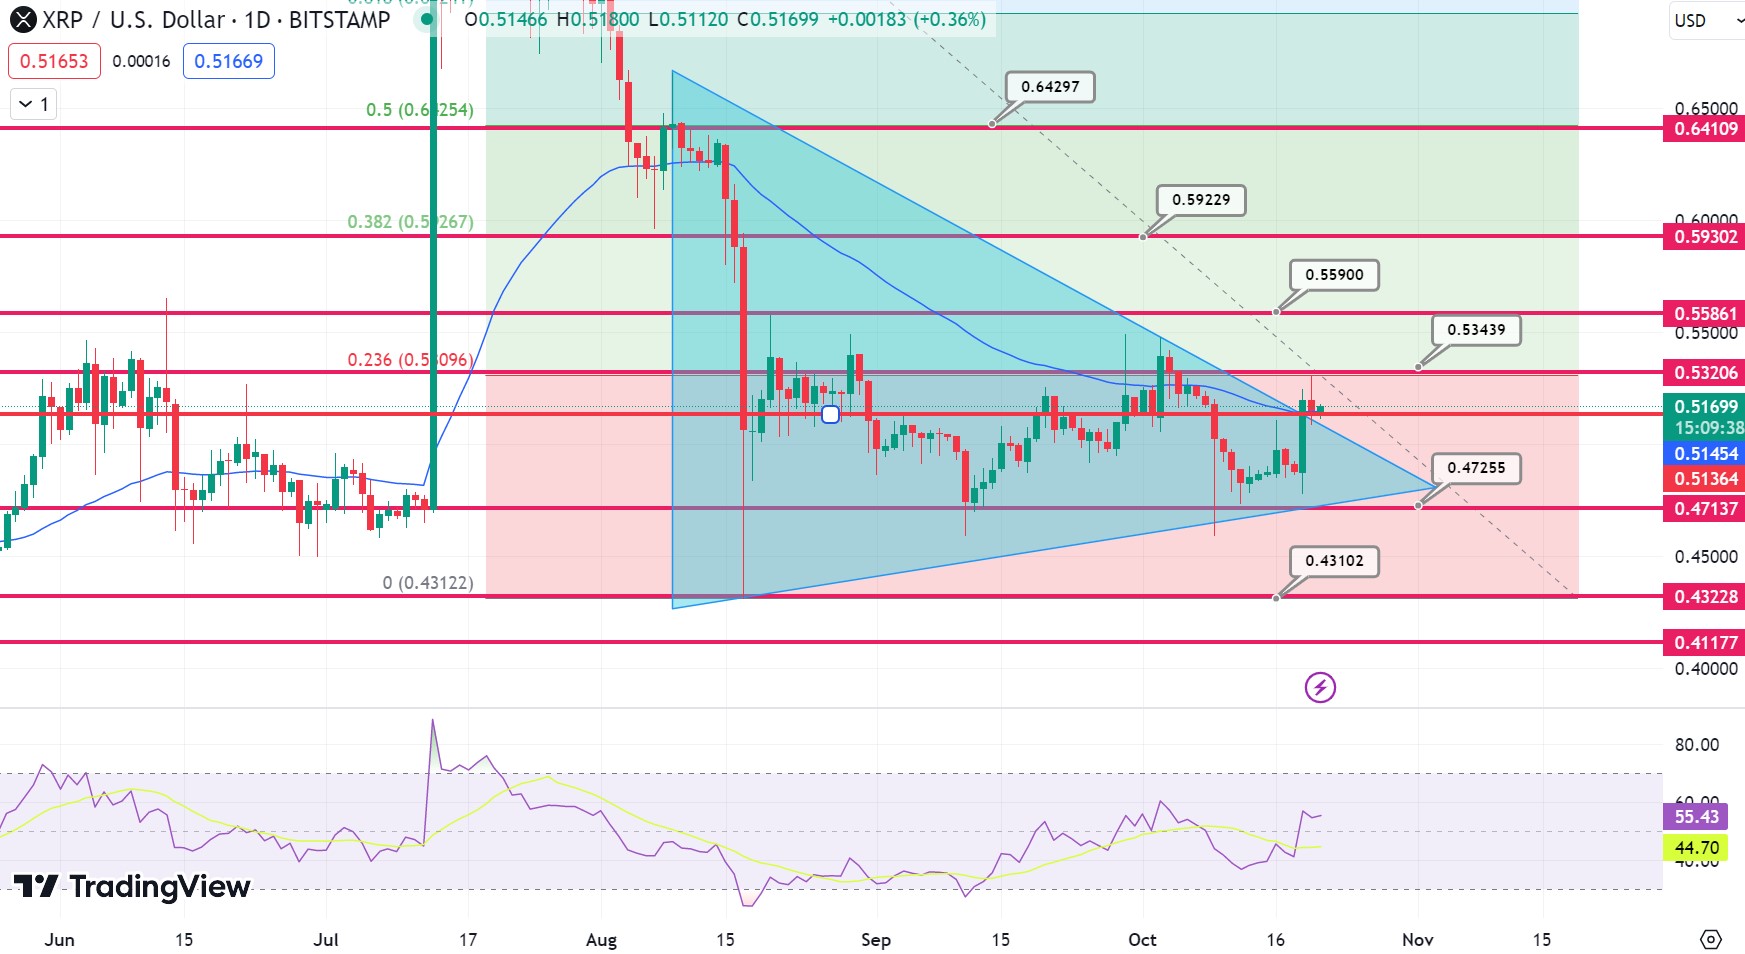 XRP Price Prediction as Price Retracts to $0.5158: Is This a Healthy Correction Before the Next Uptrend?